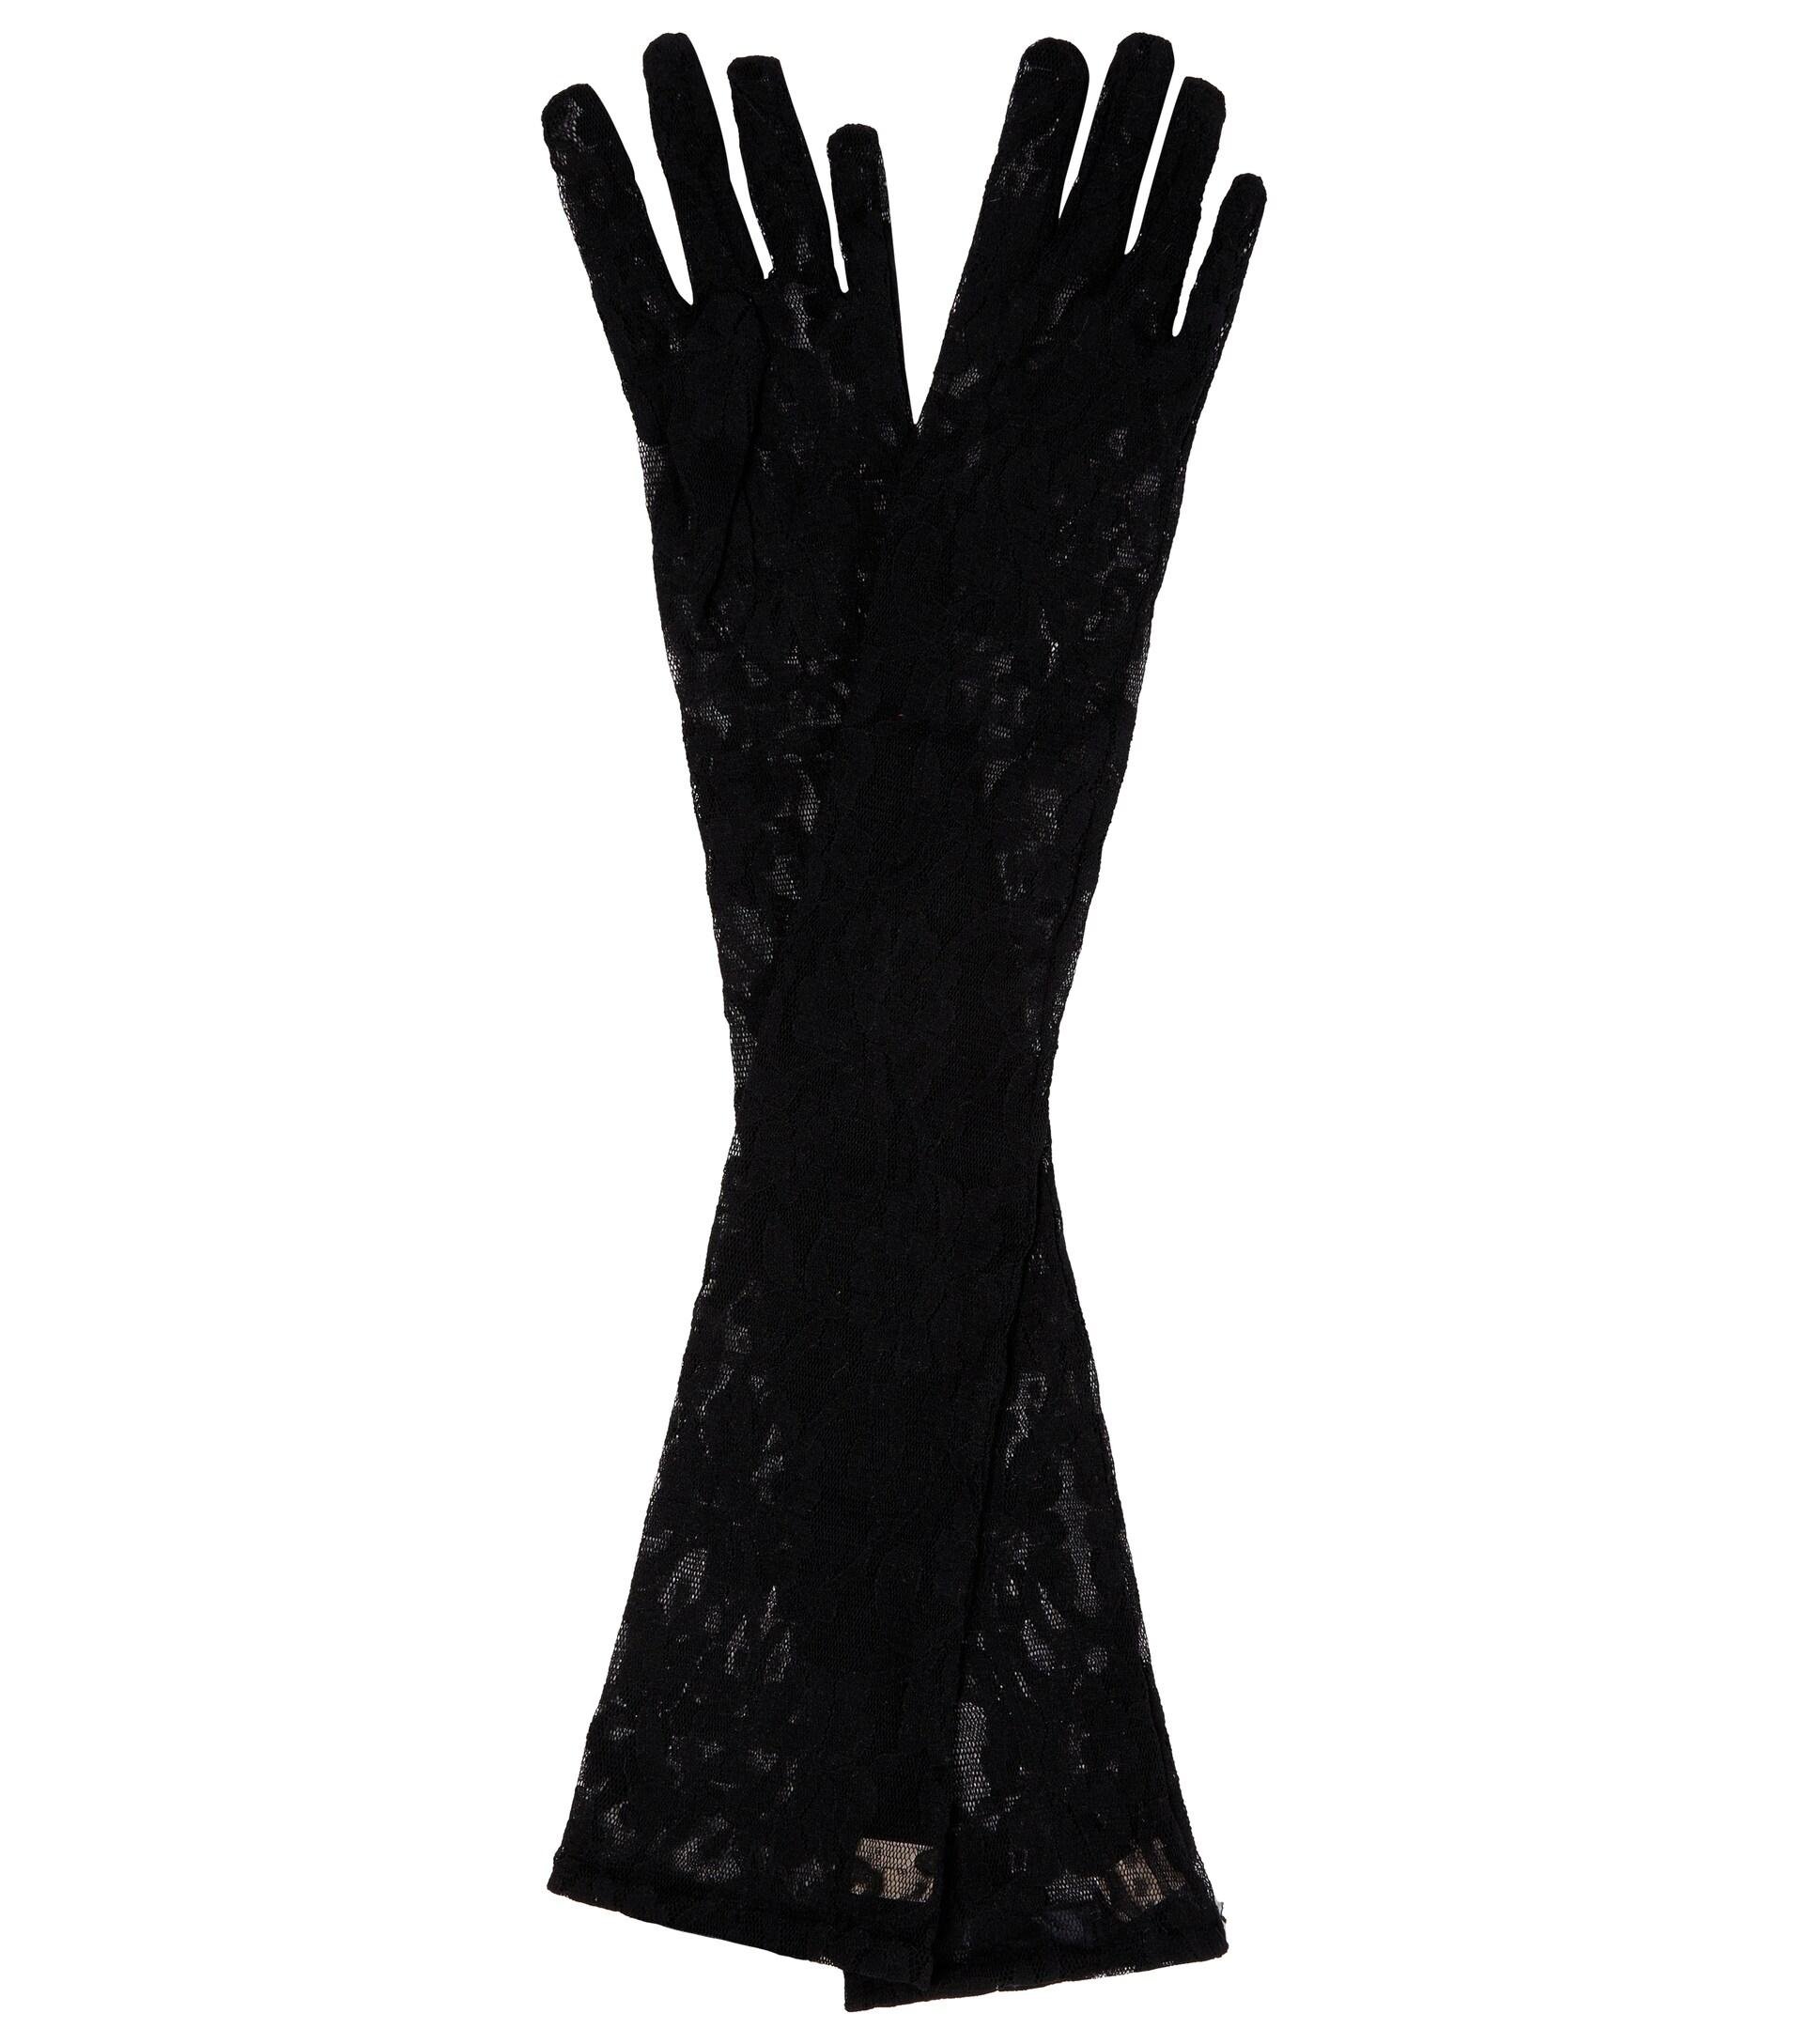 GUCCI Lace Fingerless Gloves 7.5 Black 1163243